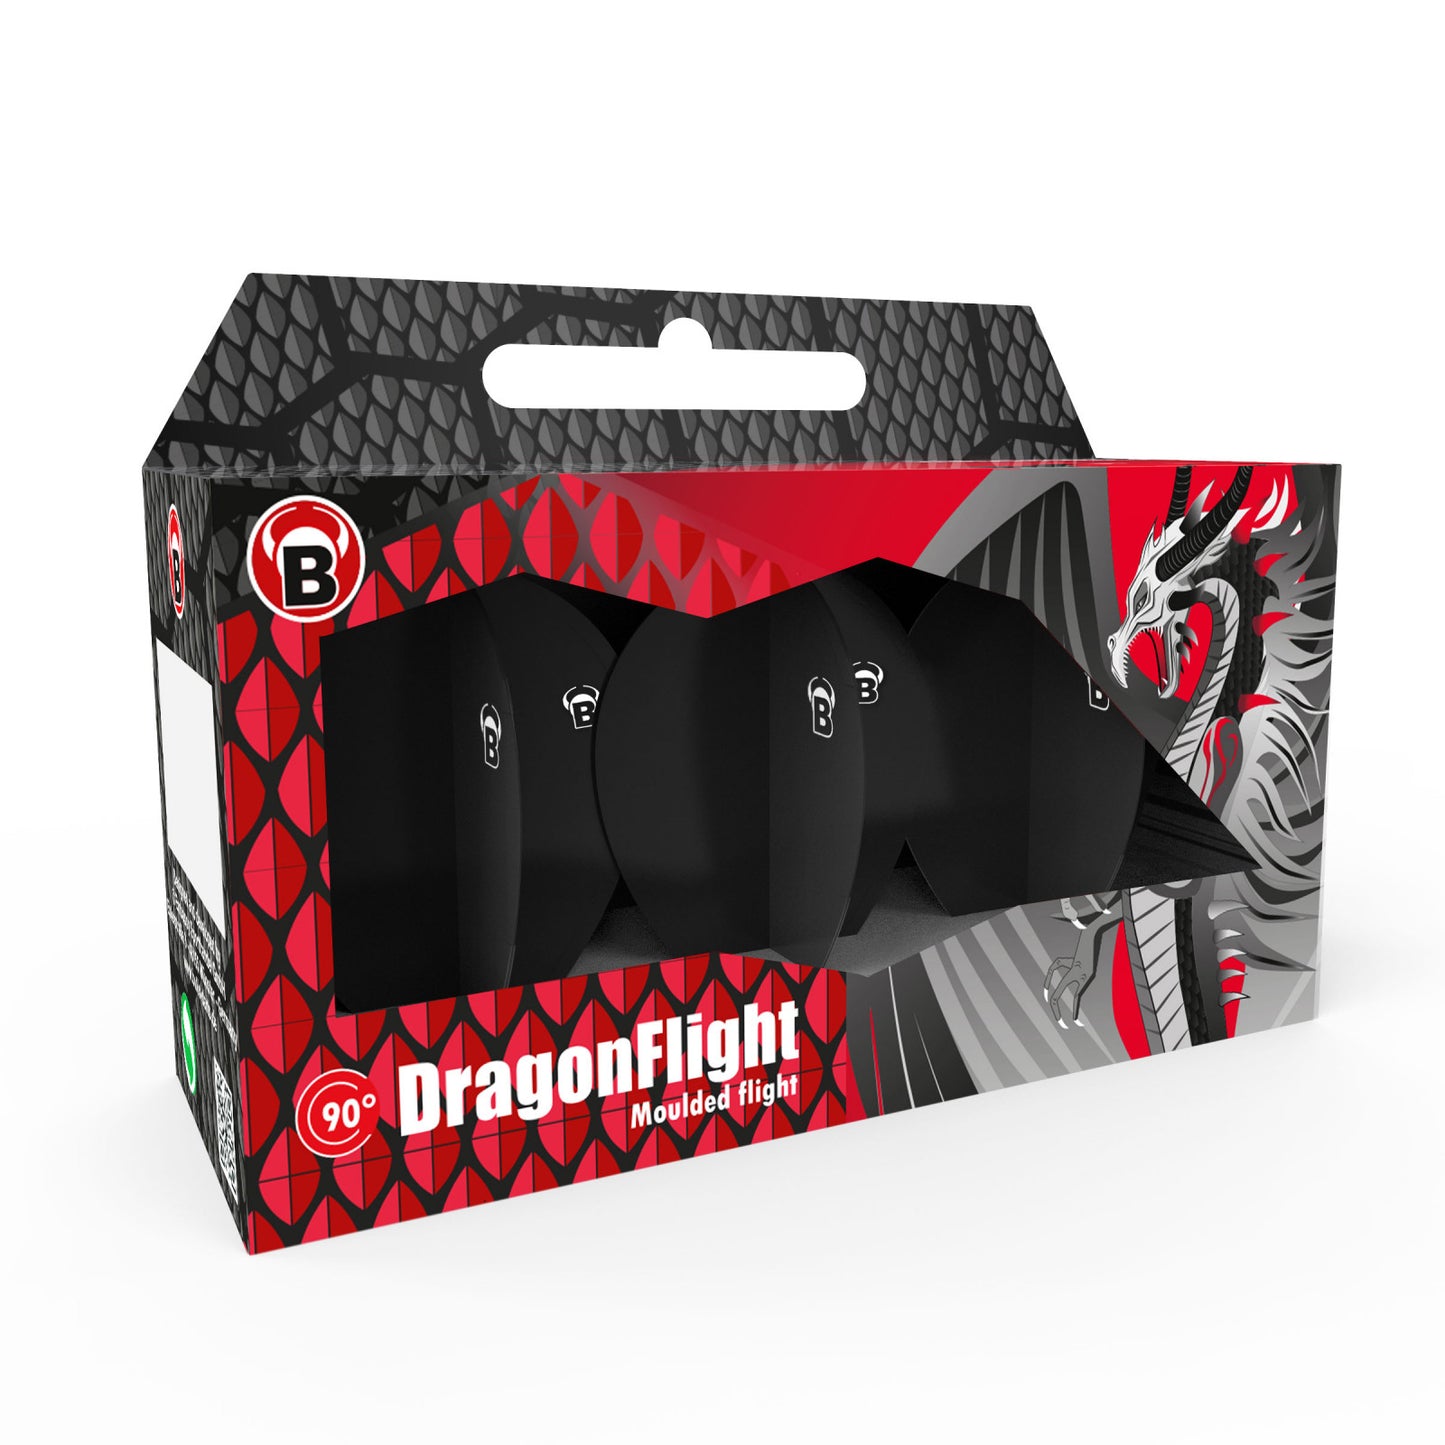 BULL'S DragonFlights - PEAR - 200 MICRONS - EXTRA STRONG FLIGHTS